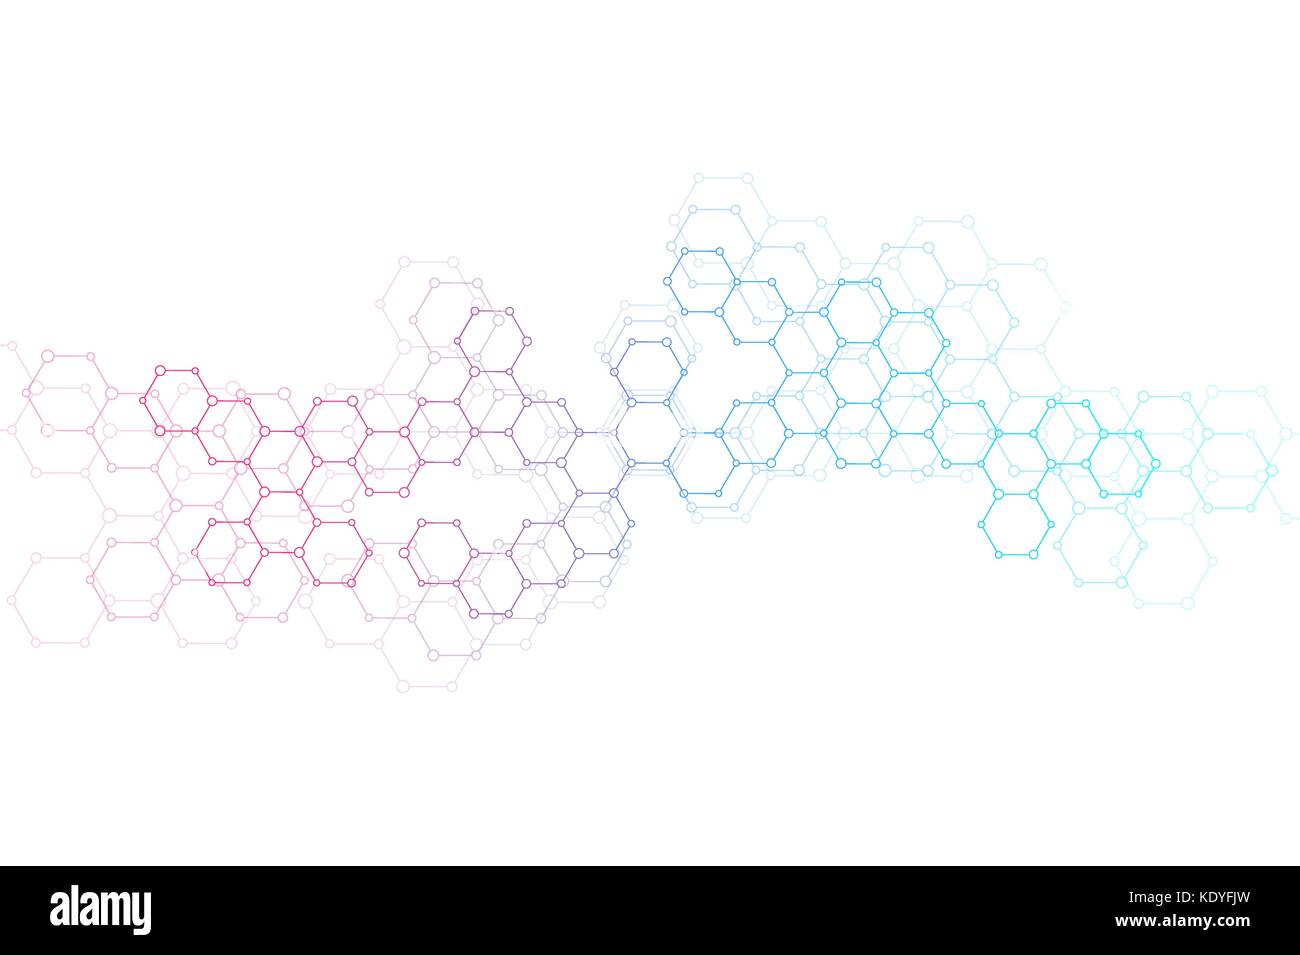 Abstract hexagonal molecule background, genetic and chemical compounds system. Geometric graphics and connected lines with dots. Scientific and technological concept, vector illustration Stock Vector